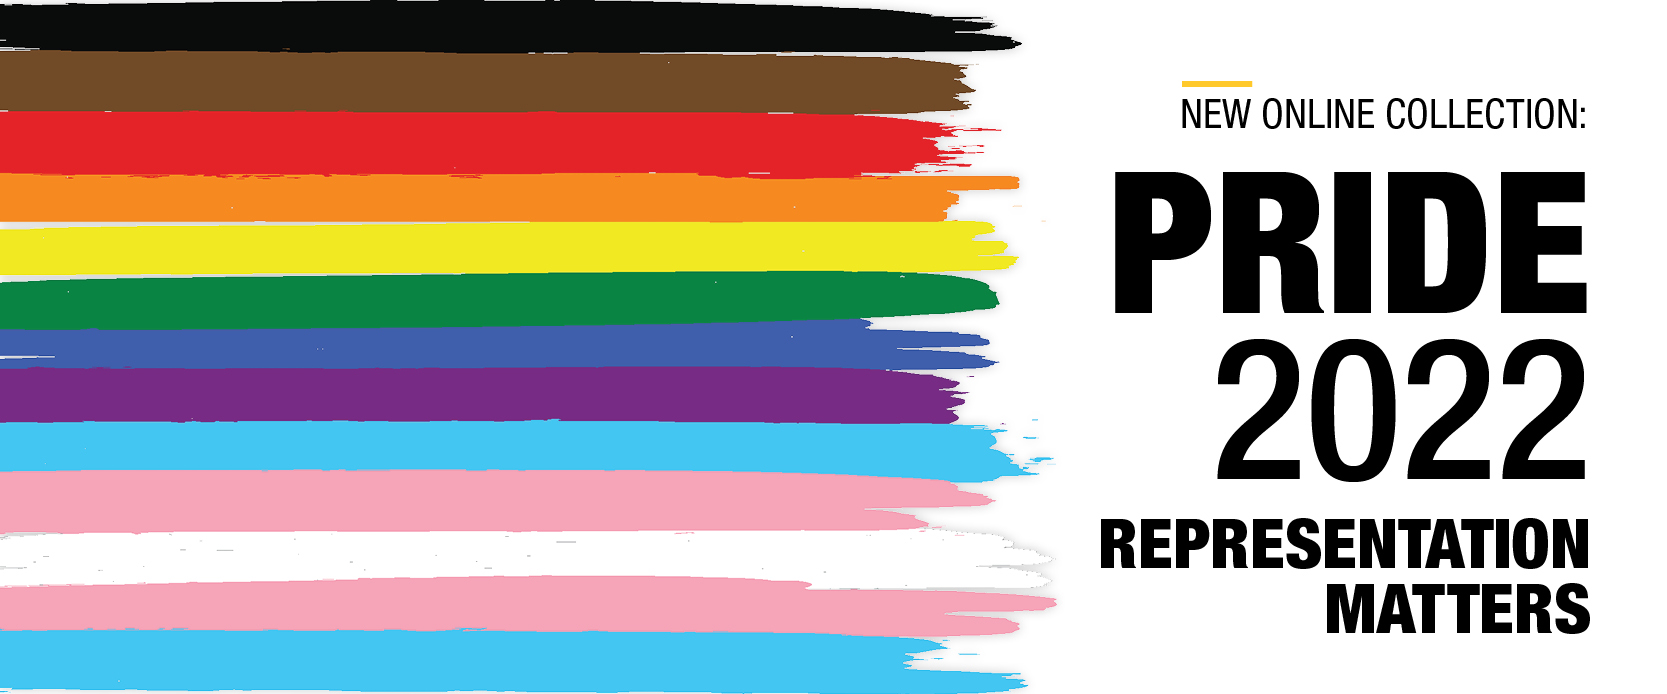 New Online Collection: Pride 2022. Representation Matters. Paint strokes that are the colours of the pride flag.